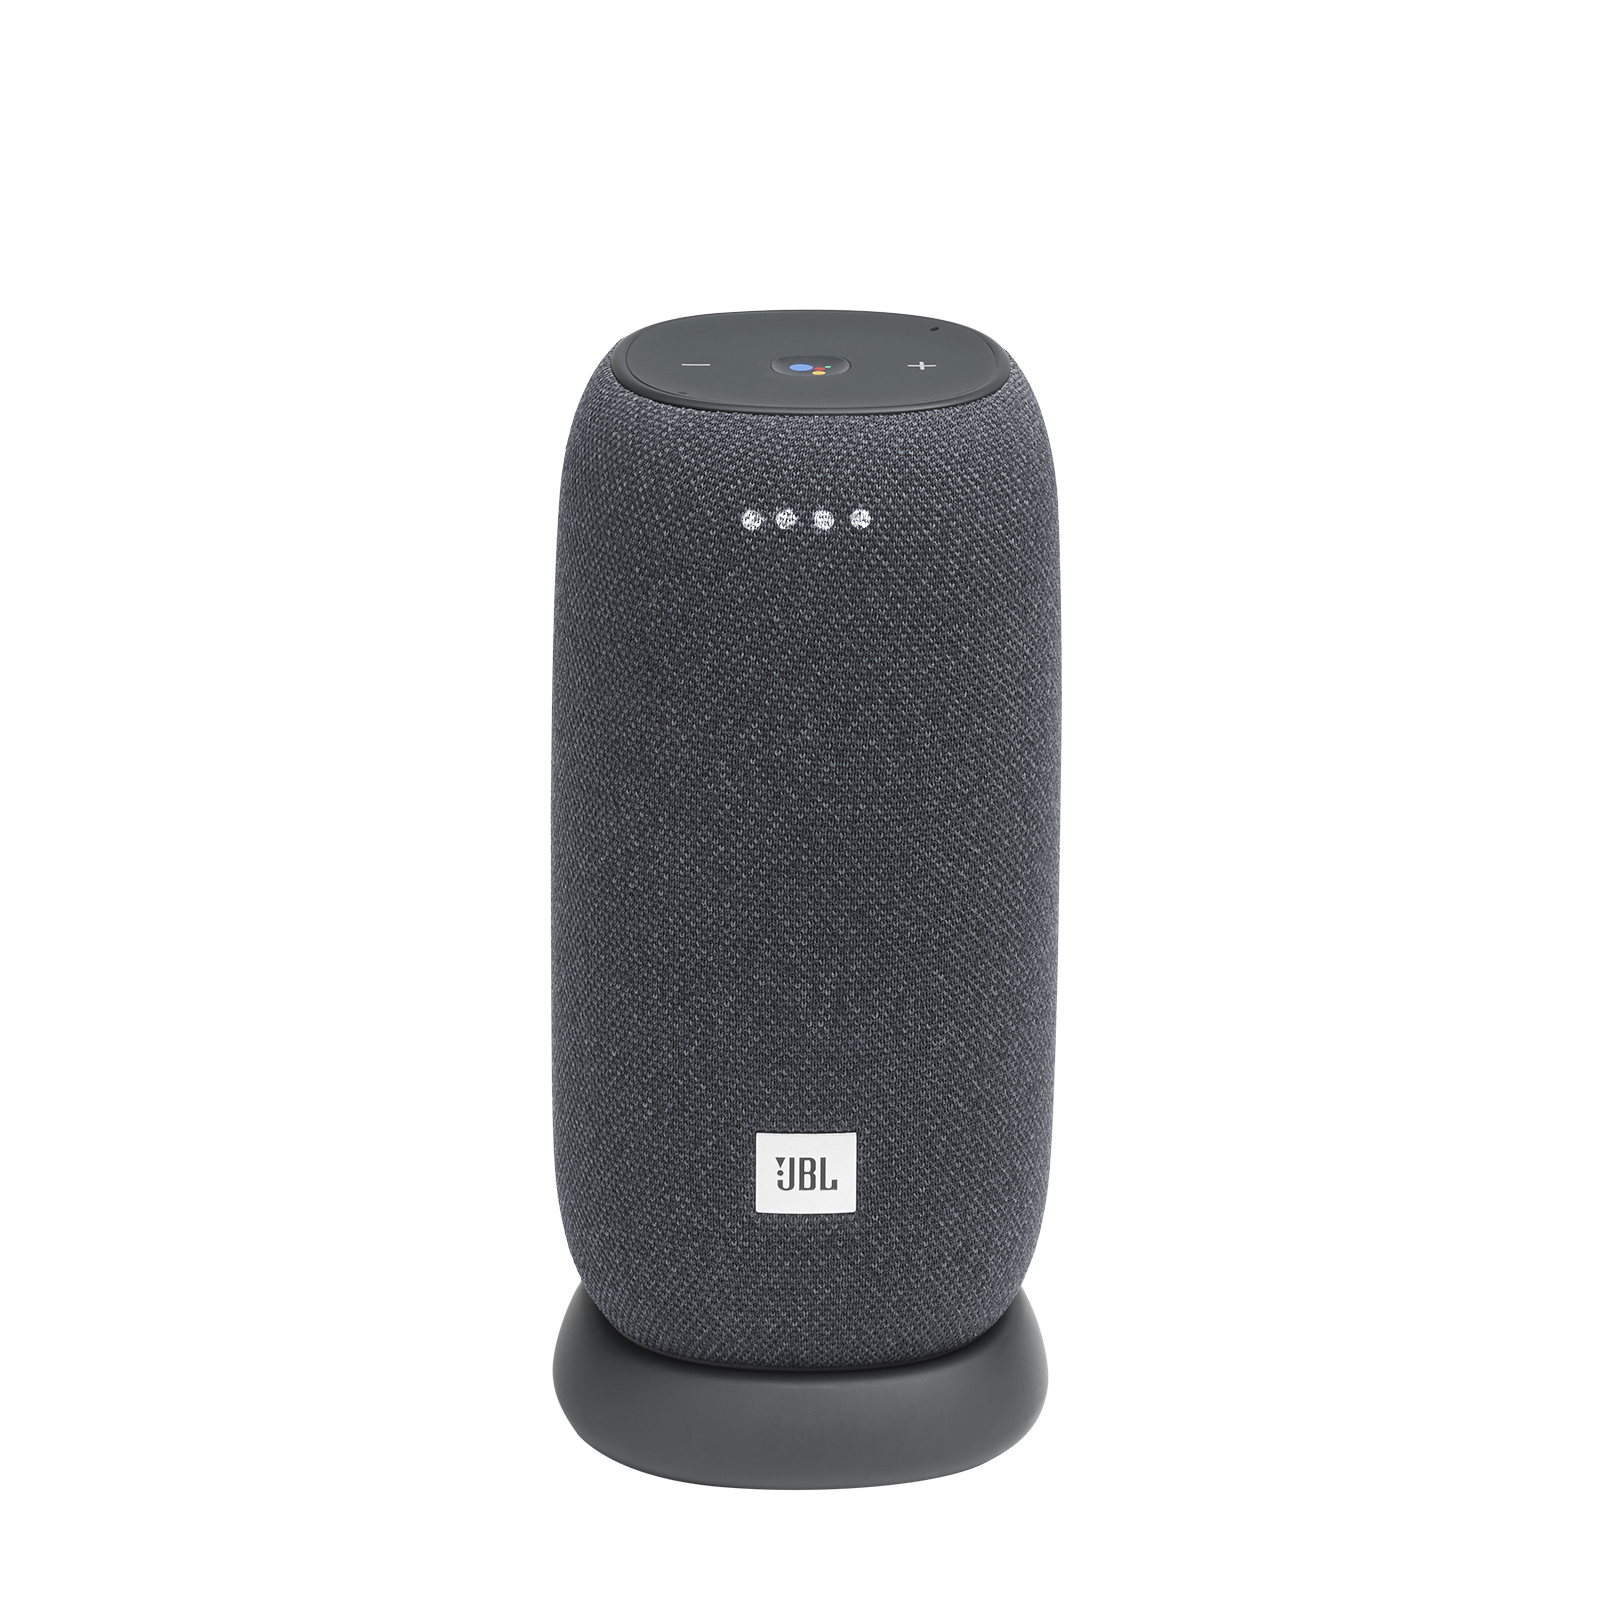 JBL Link Smart Portable Wi-Fi and Bluetooth Speaker w Google Assistant - Gray - image 1 of 5